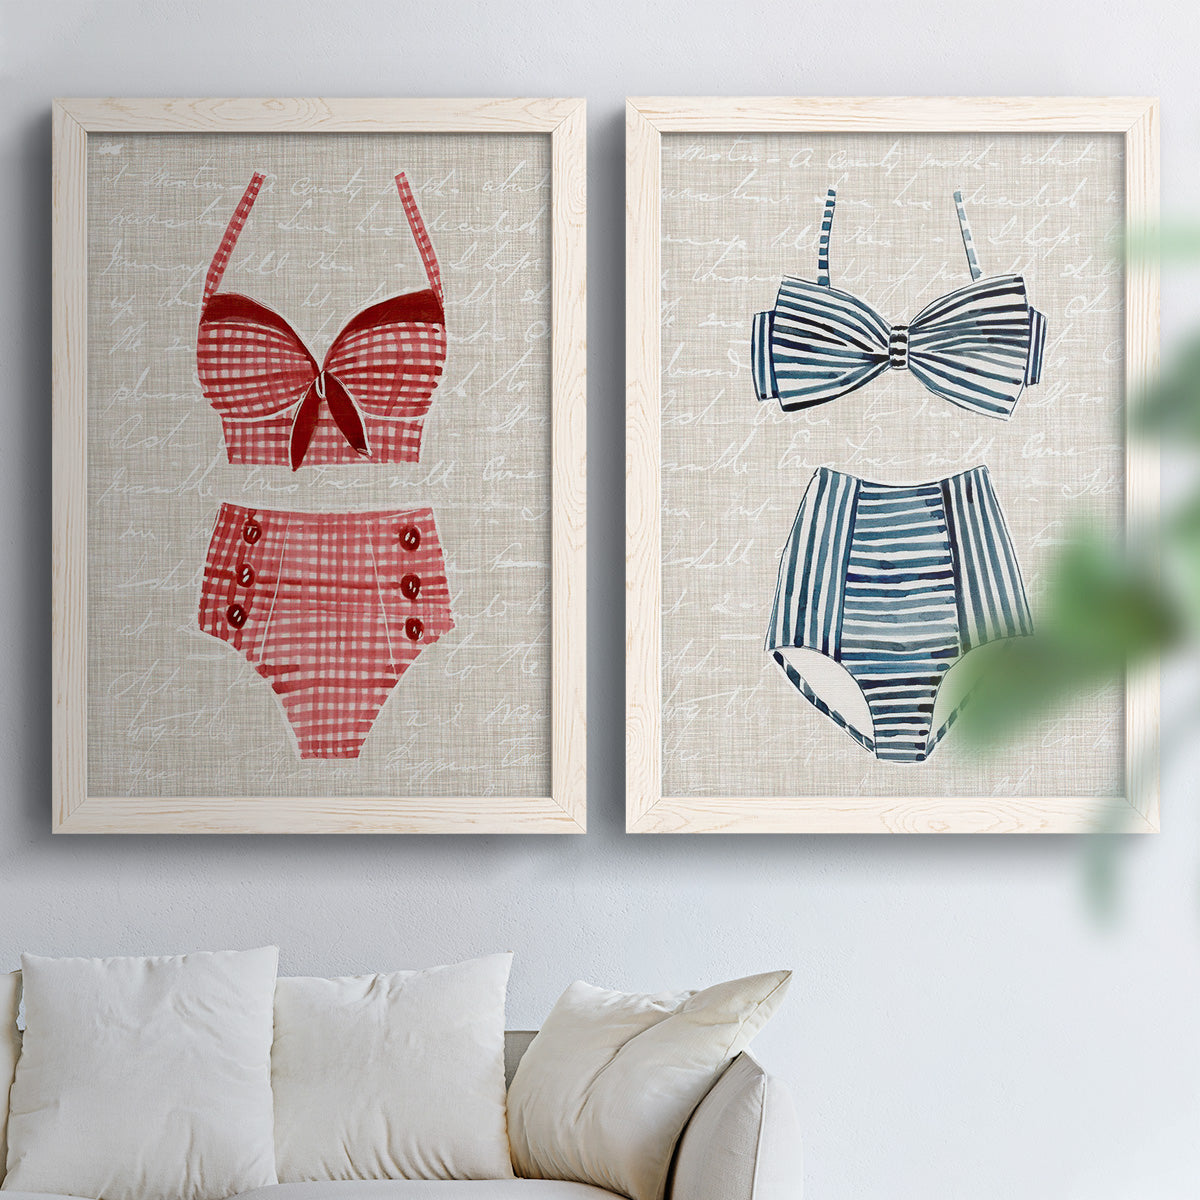 Vintage Swimming III - Premium Framed Canvas 2 Piece Set - Ready to Hang